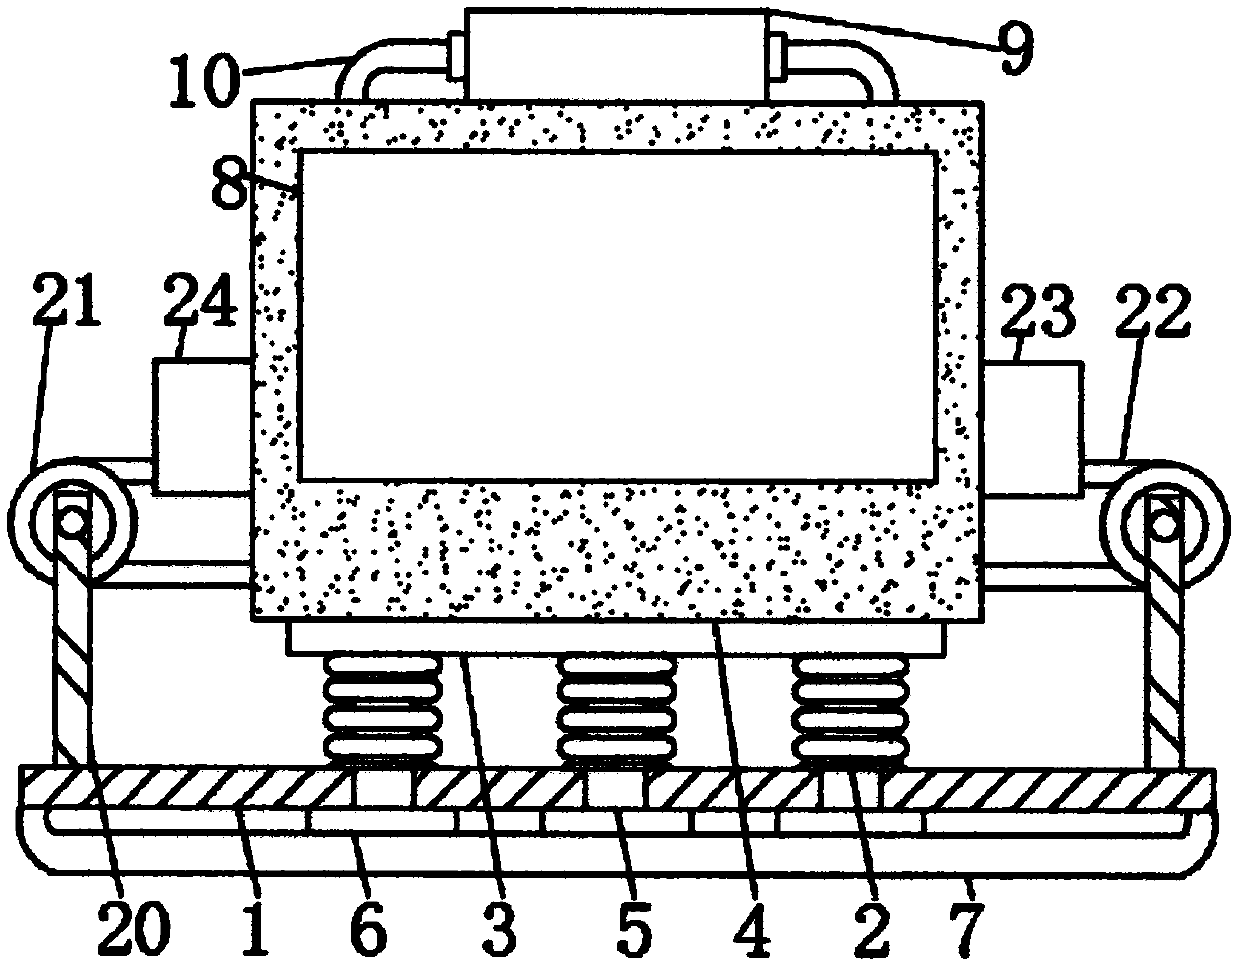 Full-automatic AG glass production and manufacturing equipment and technological process thereof